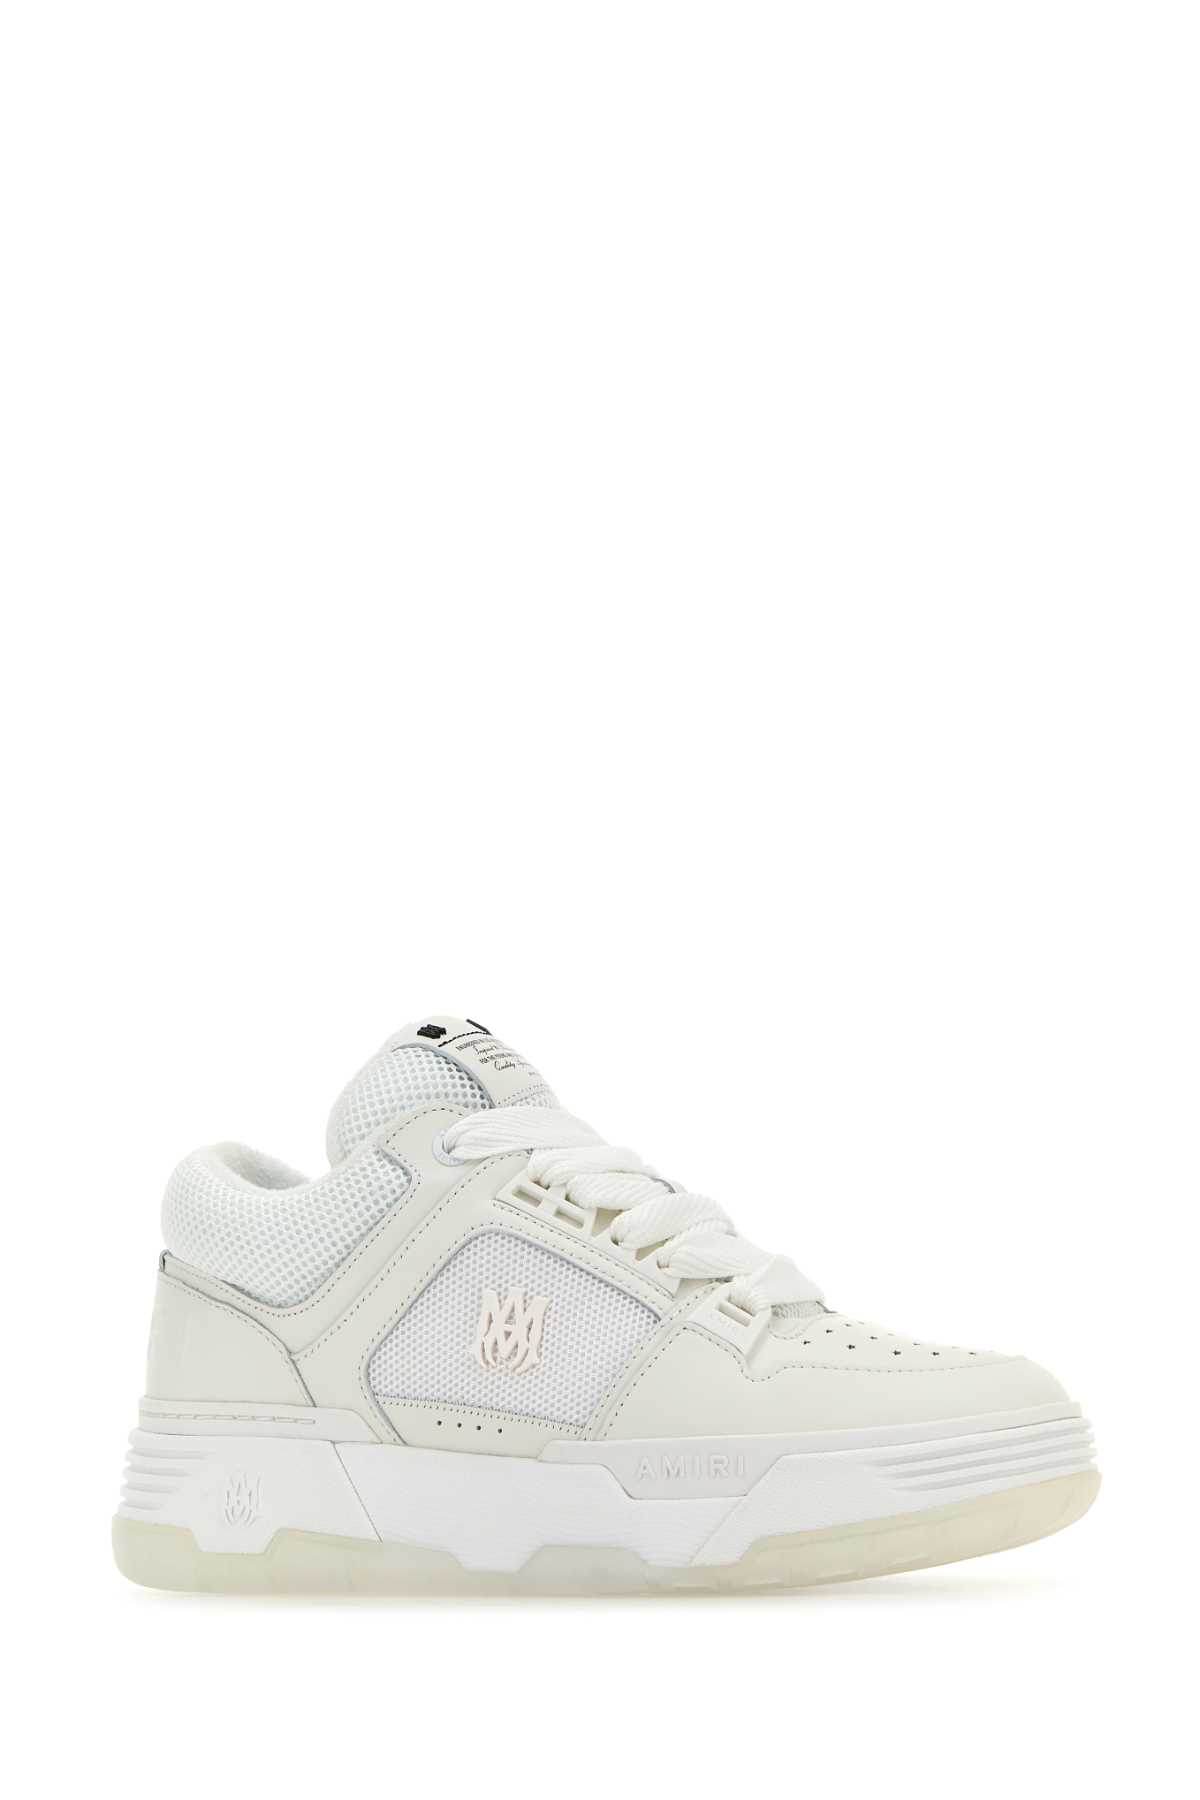 Amiri White Leather And Fabric Ma-1 Sneakers